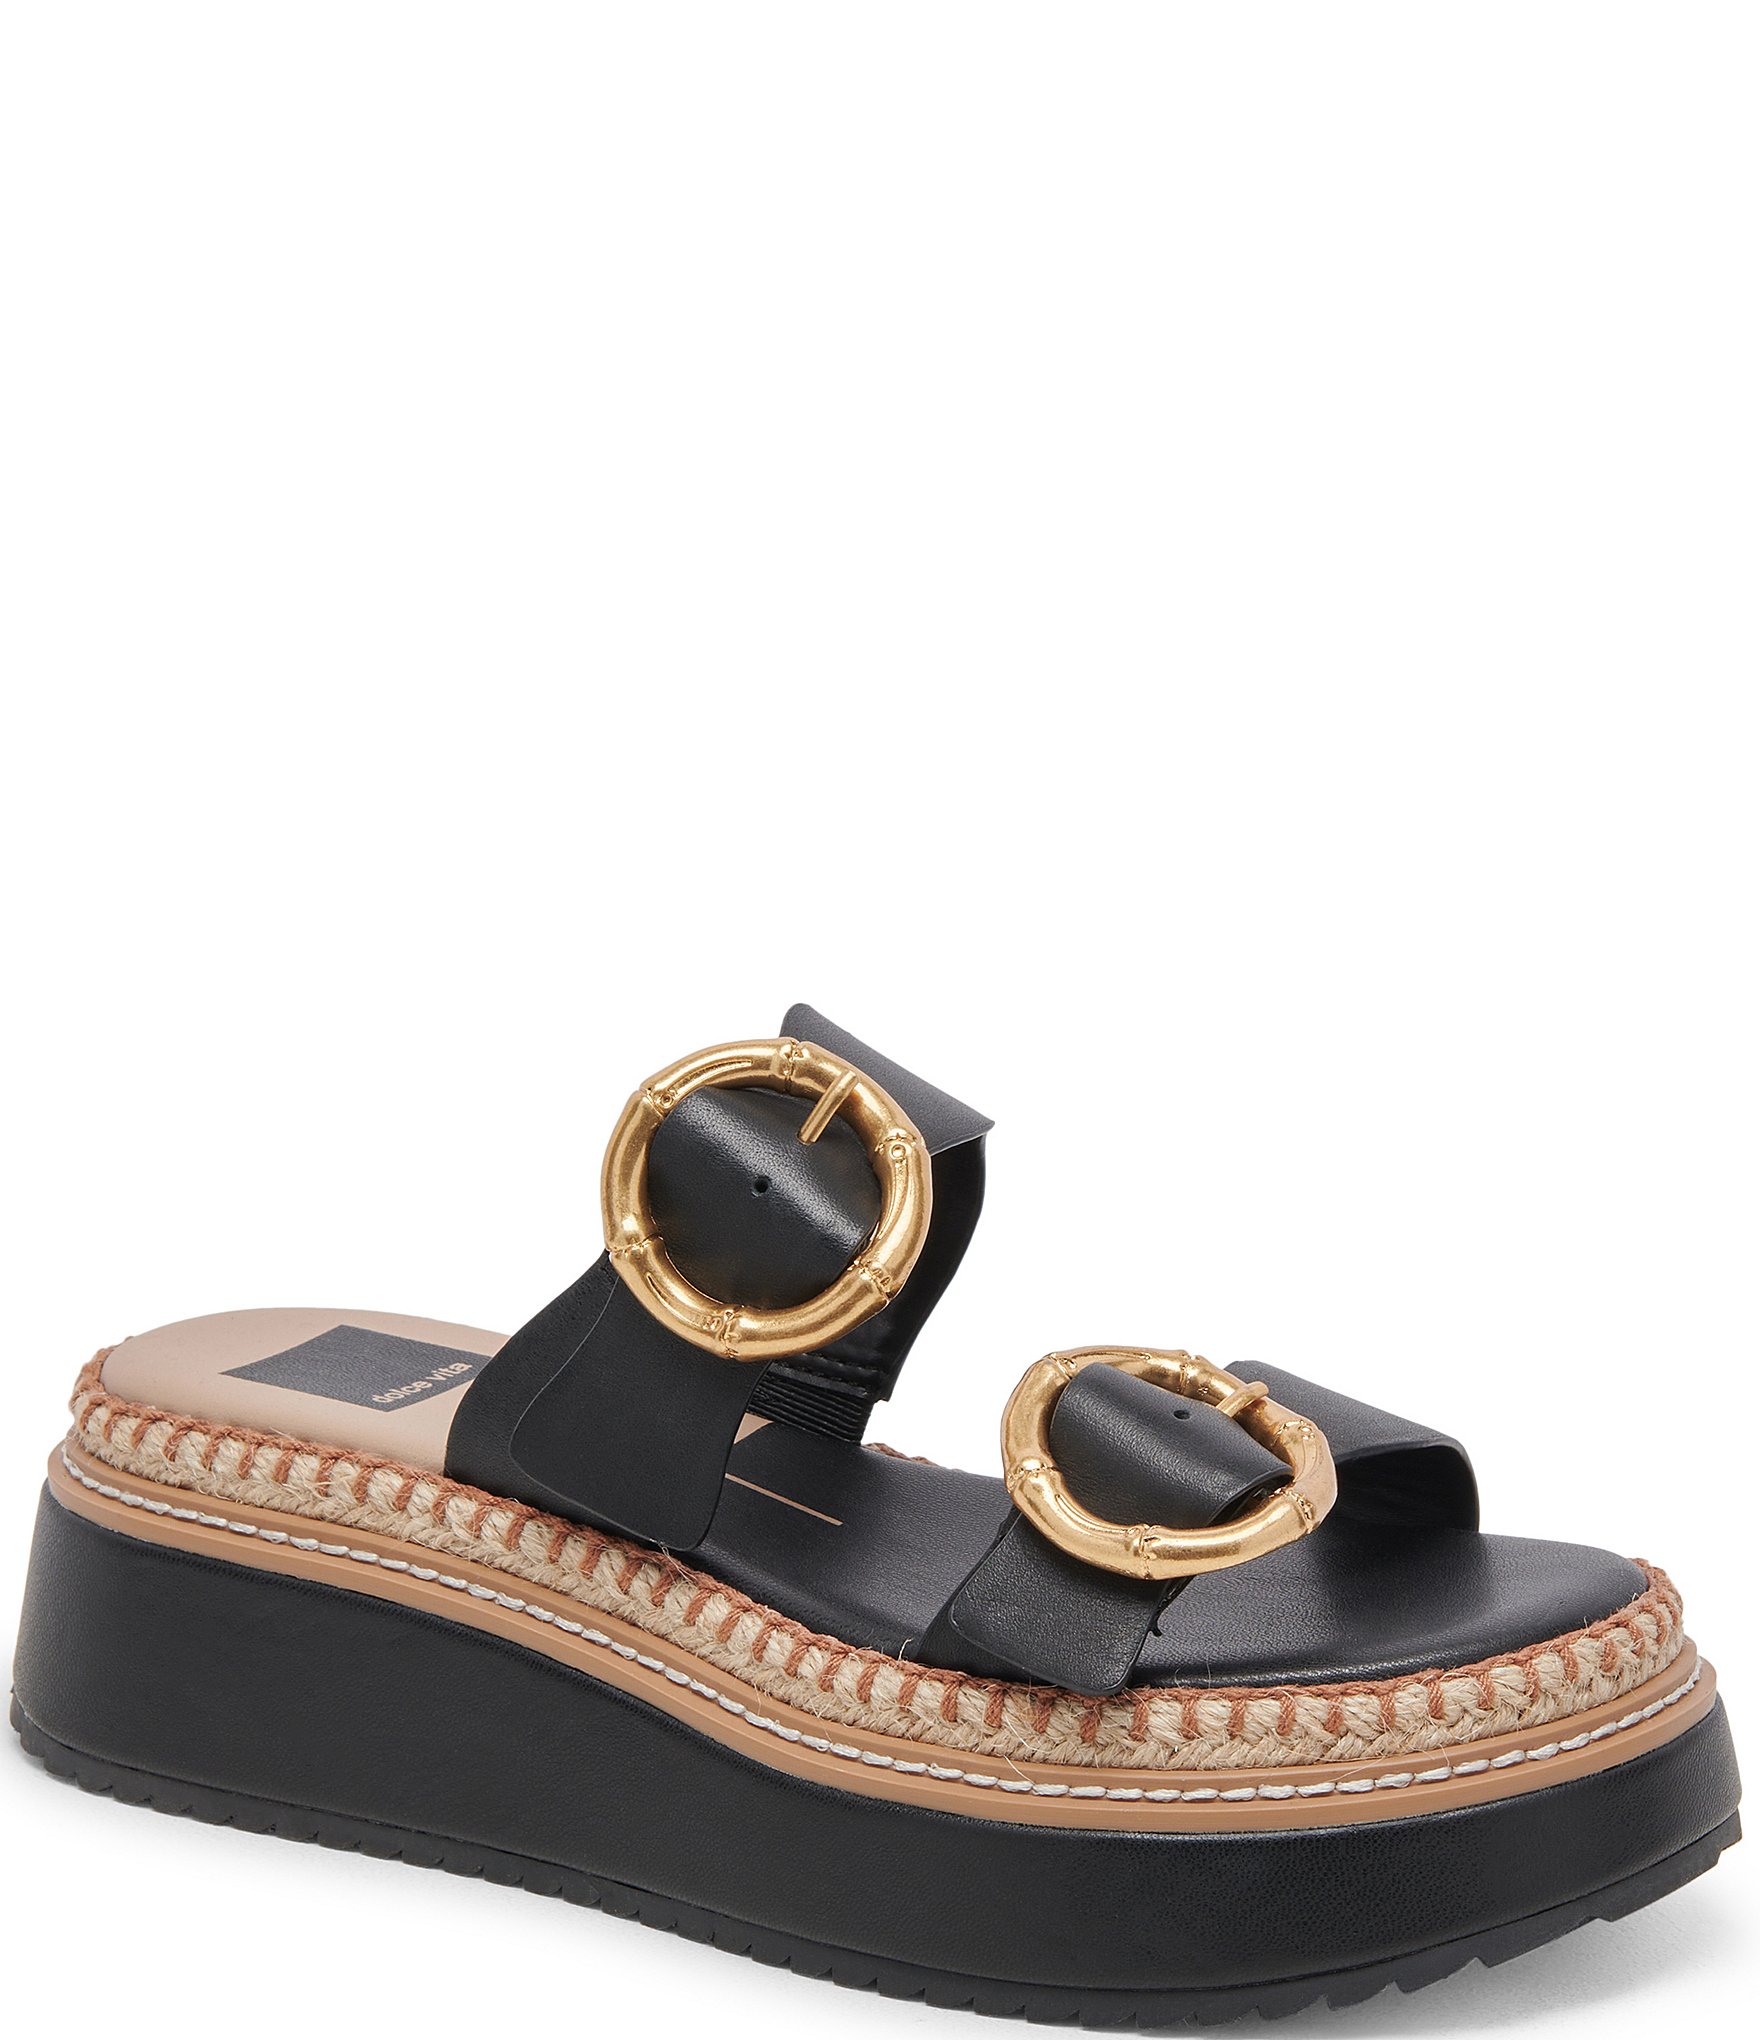 Black Patent Leather Mules with Crystal Strap, BING FLAT, Cruise 19